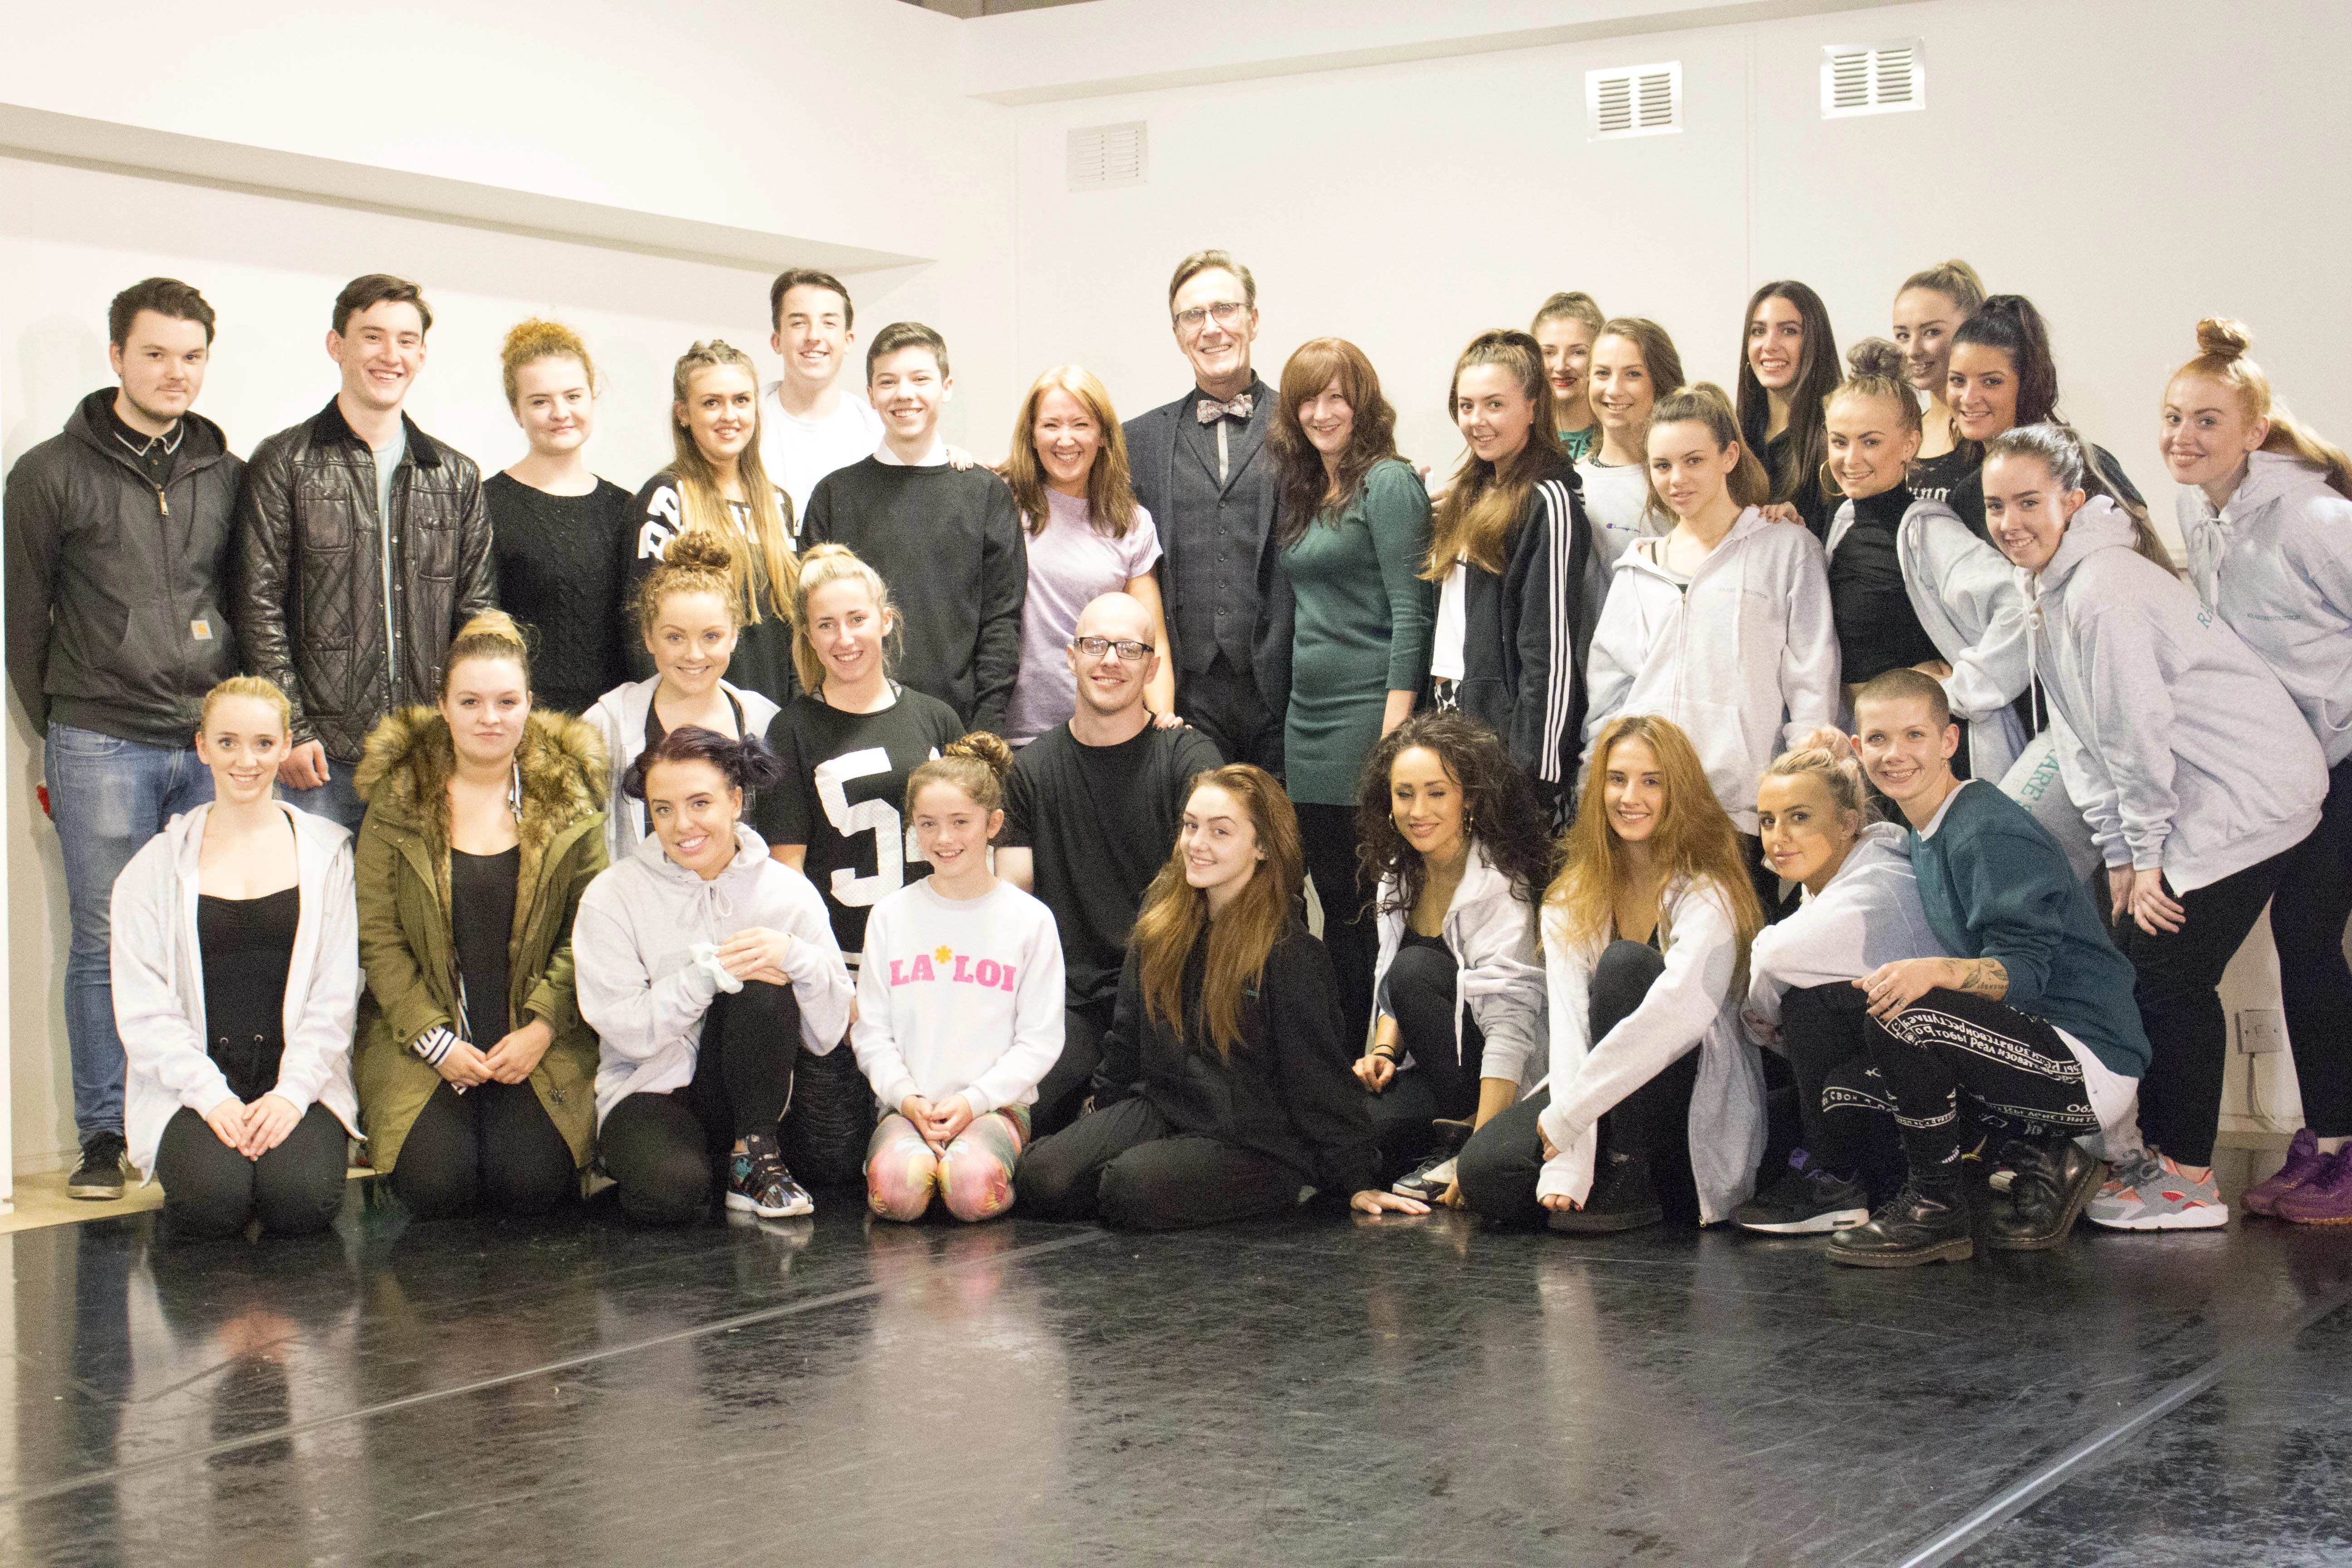 Members of Rare Trust, a performing arts school in Liverpool